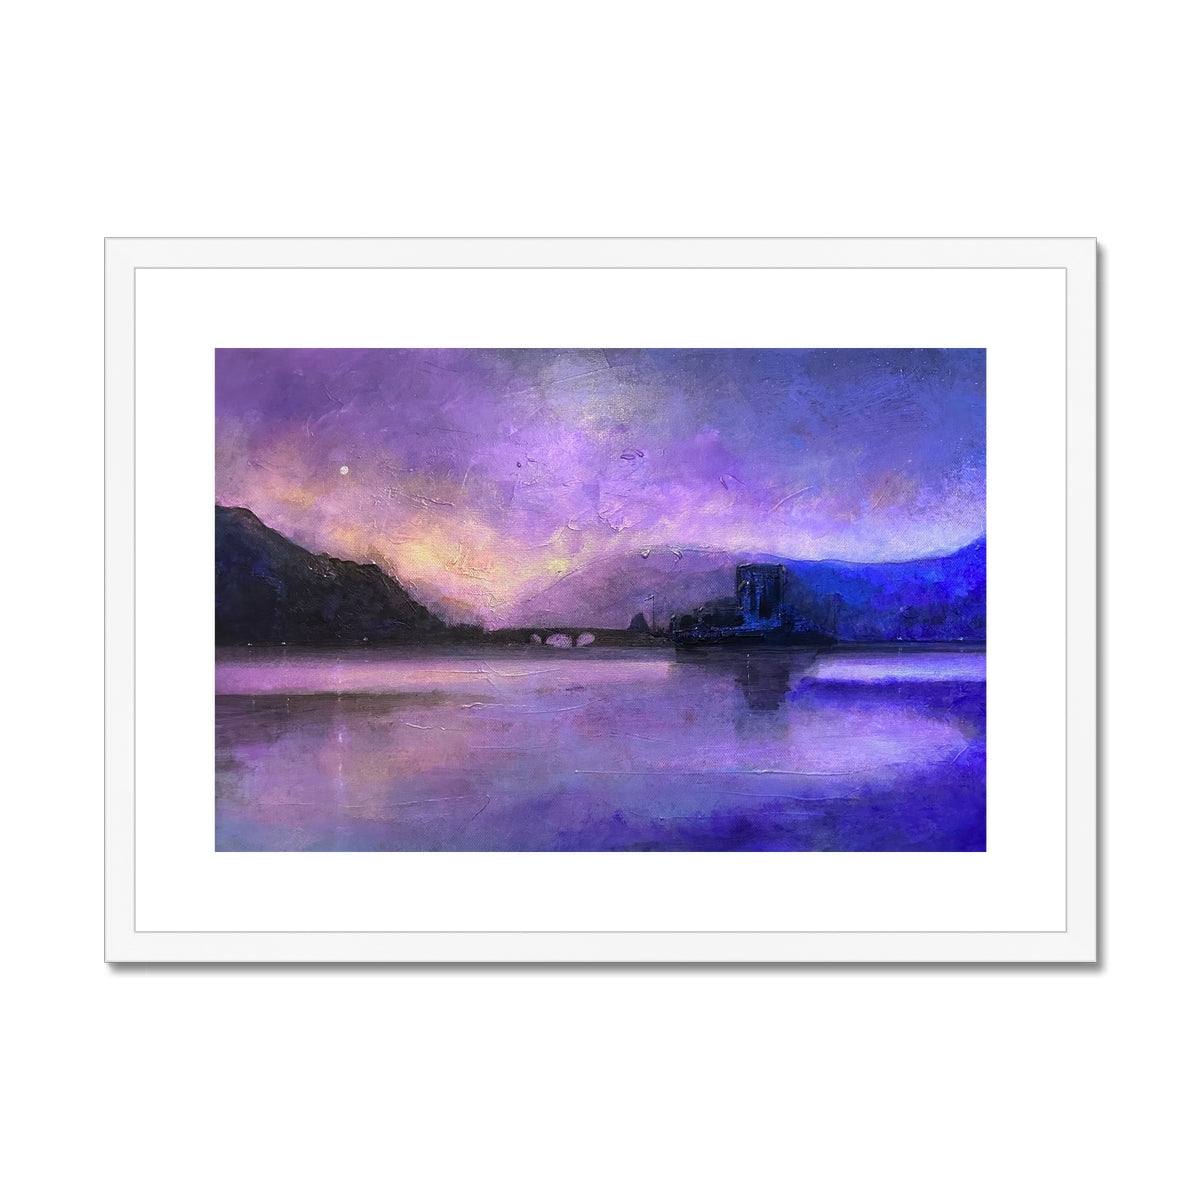 Eilean Donan Castle Moonset Painting | Framed & Mounted Prints From Scotland-Framed & Mounted Prints-Historic & Iconic Scotland Art Gallery-A2 Landscape-White Frame-Paintings, Prints, Homeware, Art Gifts From Scotland By Scottish Artist Kevin Hunter